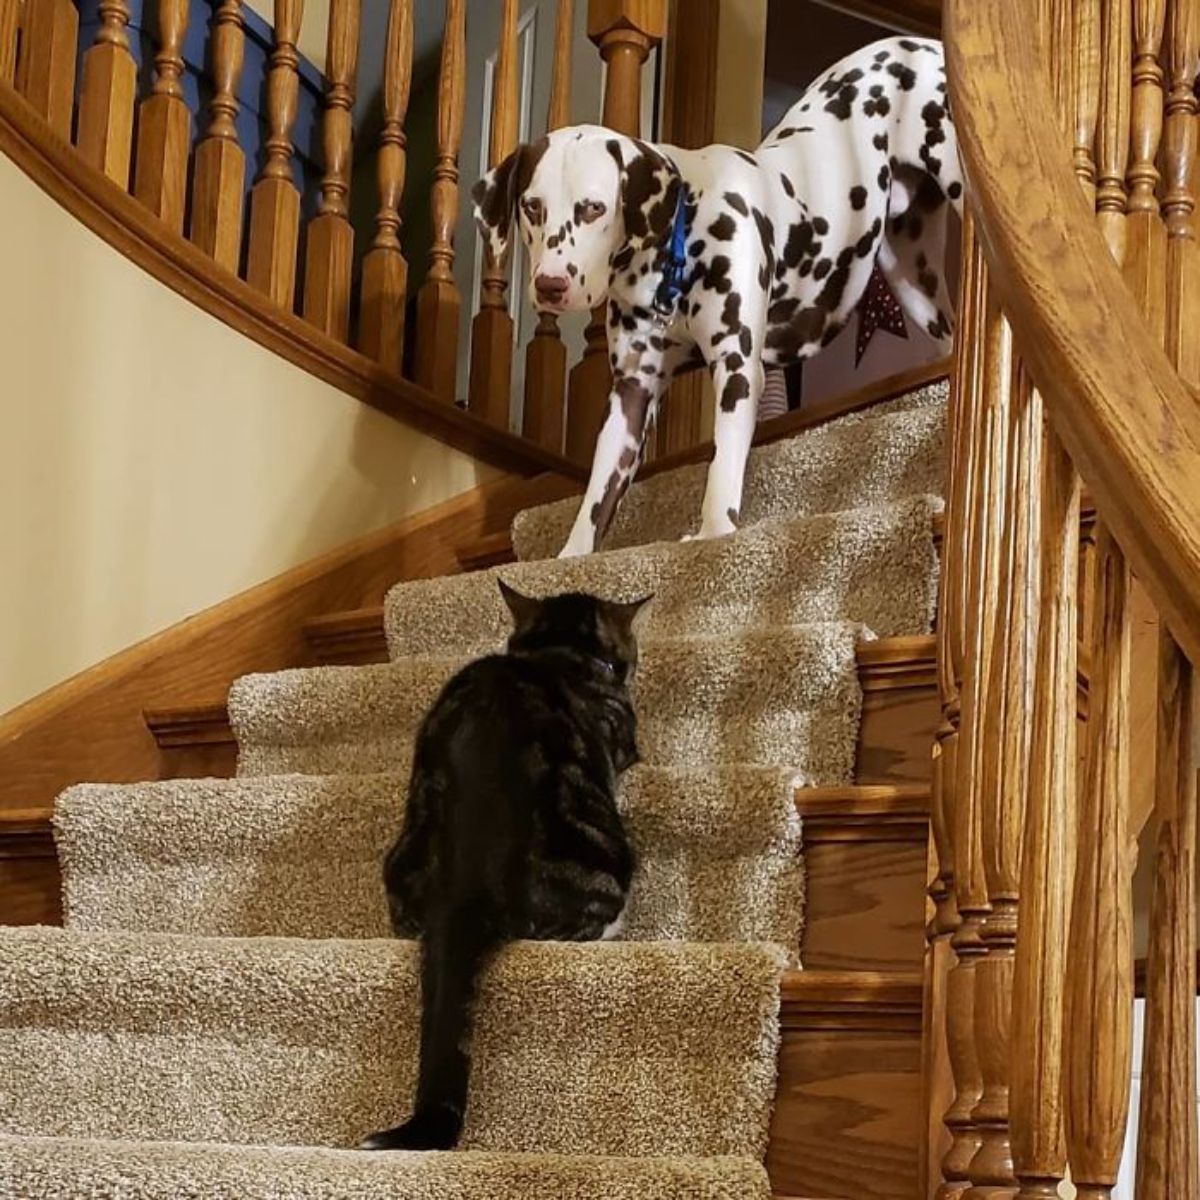 dalmation scared to go down the stairs with a grey tabby cat blocking the path